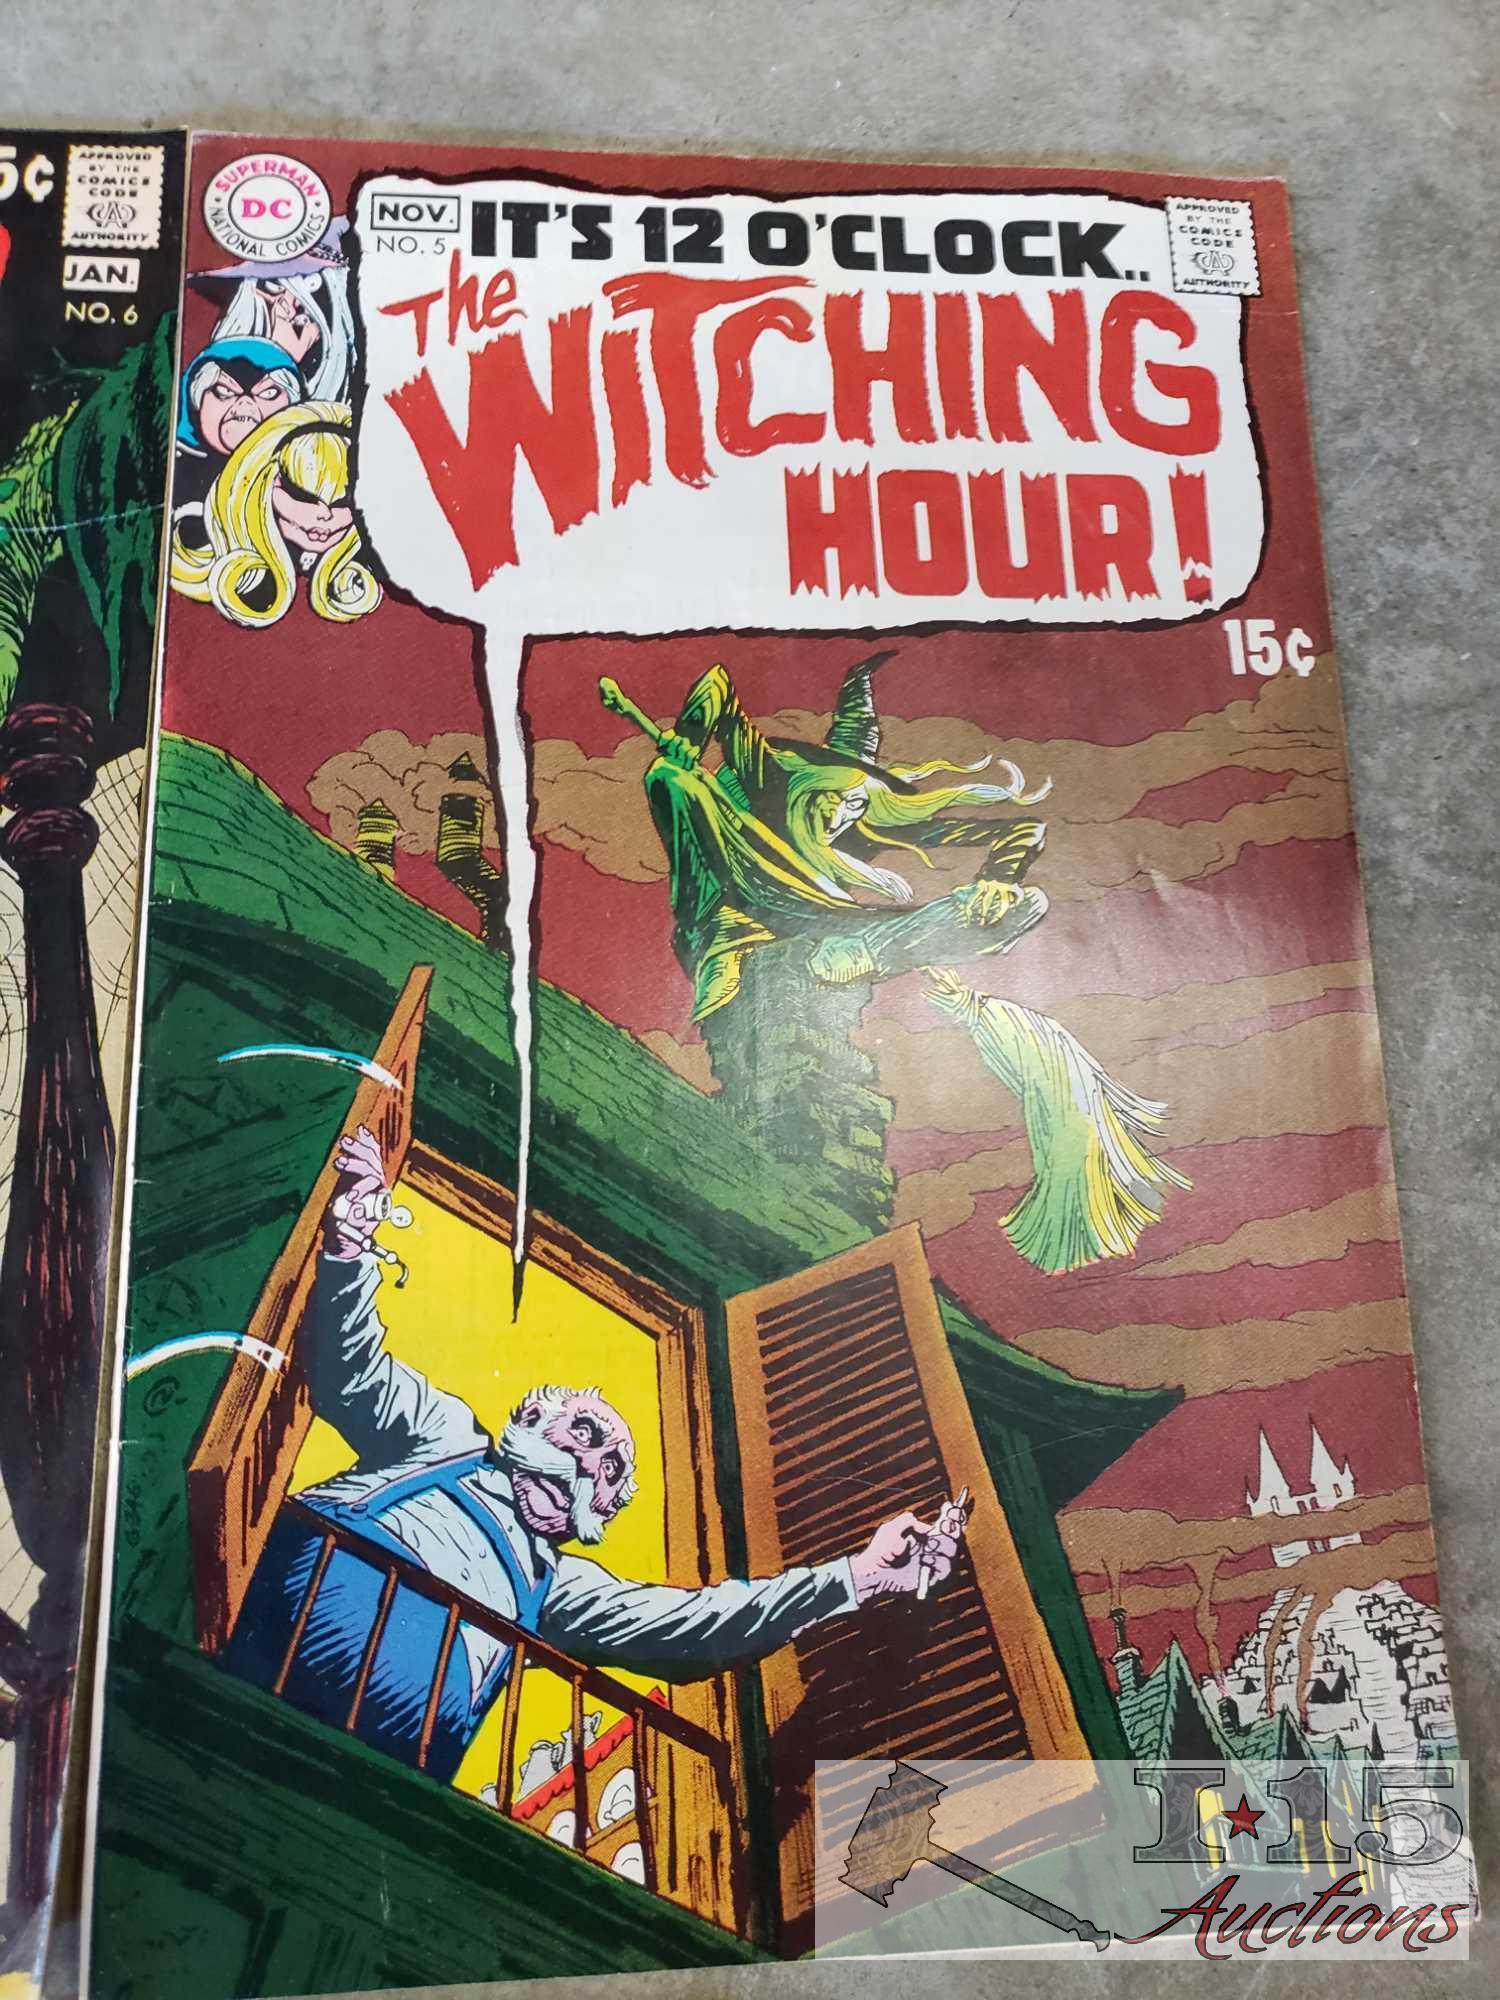 7 Issues of DC Comics. It's 12 o'Clock The Witching Hour!